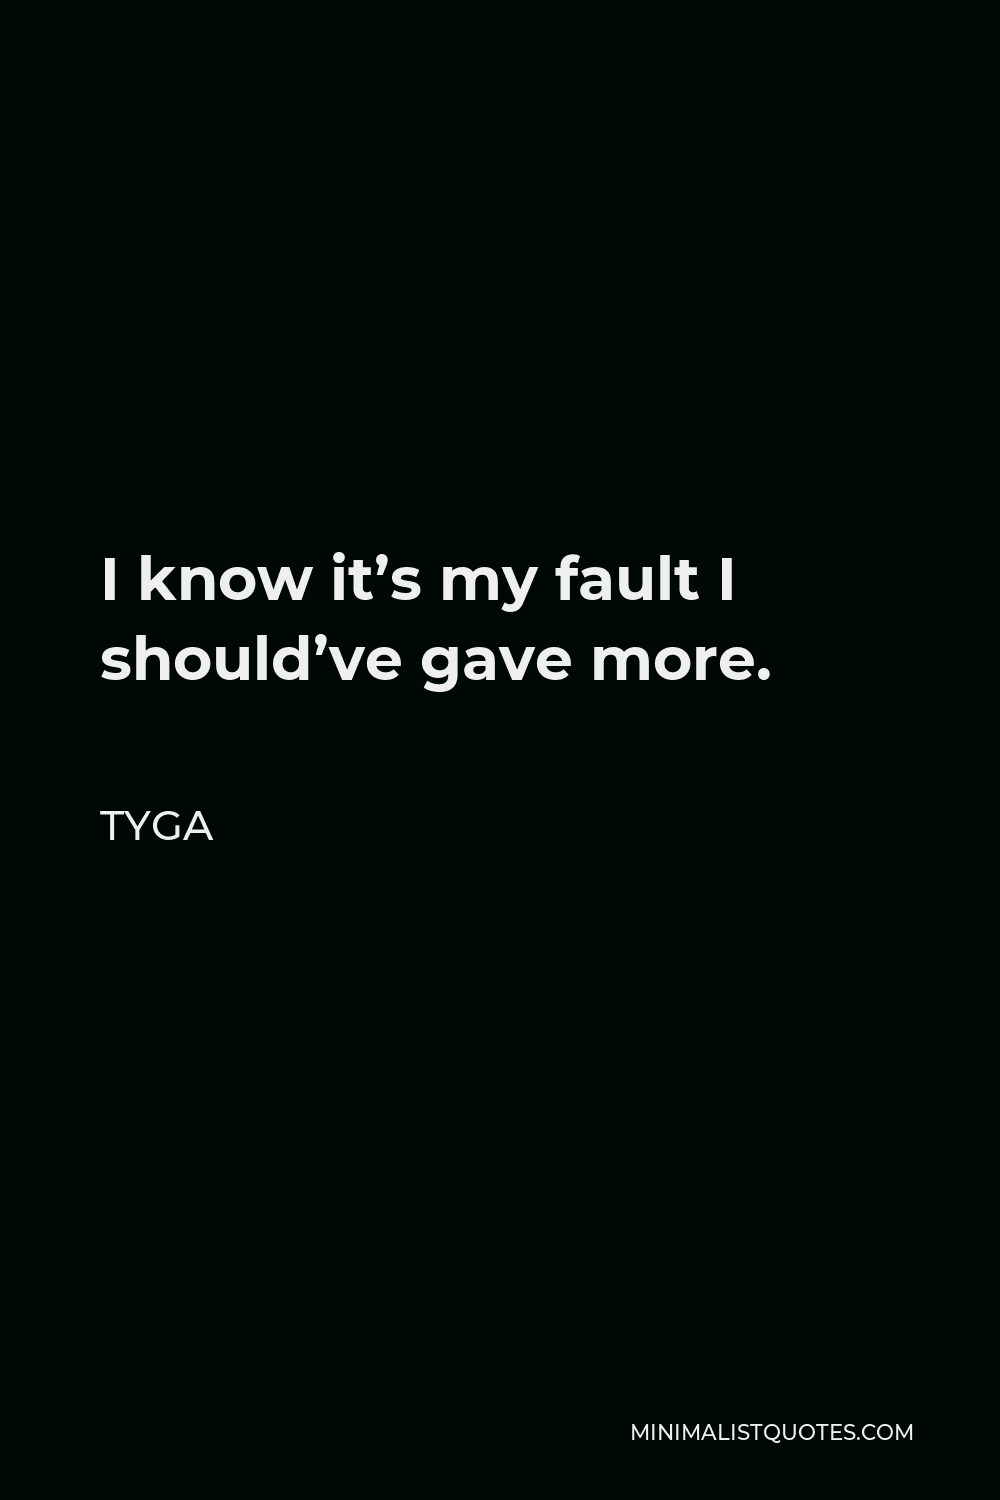 Tyga Quote - I know it’s my fault I should’ve gave more.